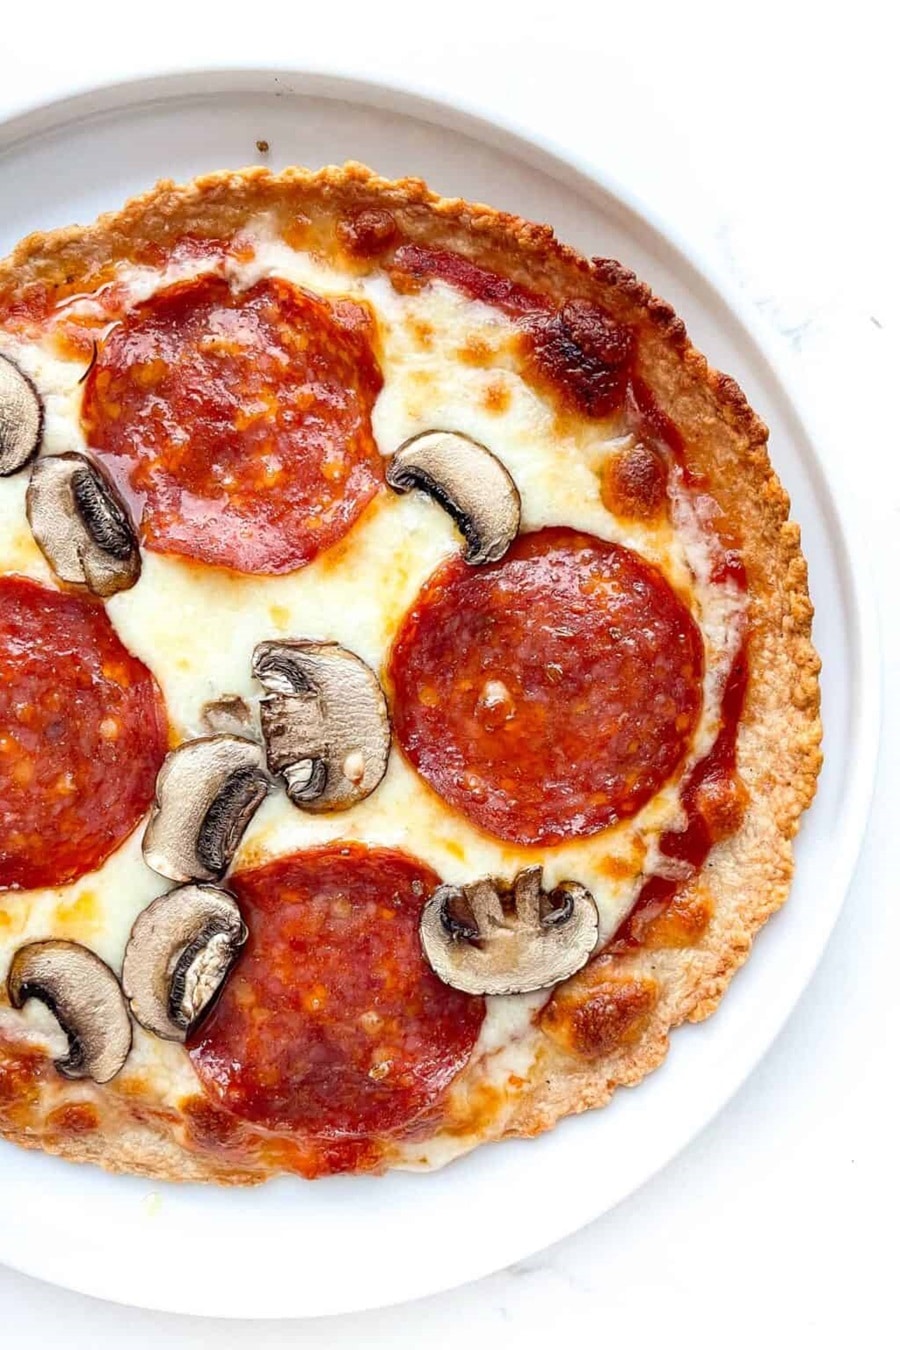 How To Make A Carb-Free Pizza Crust